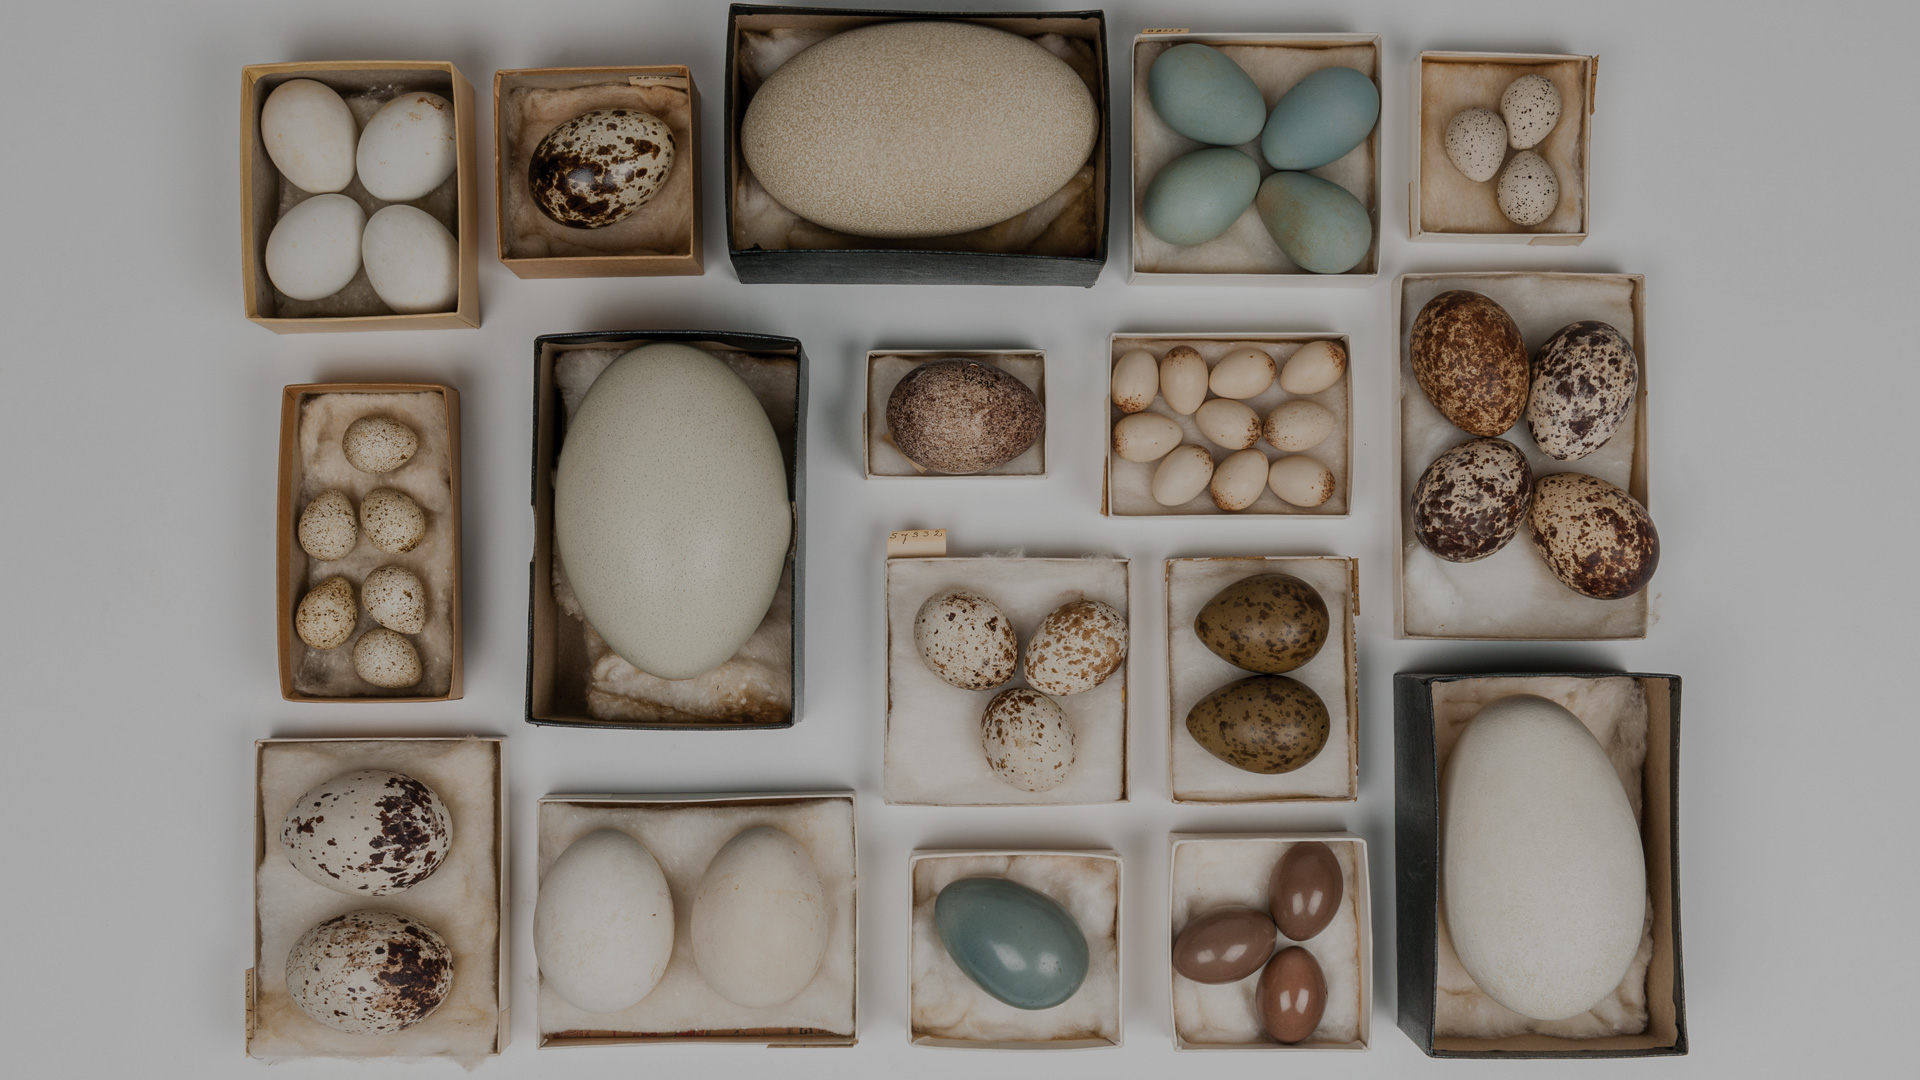 A collection of eggs from seabirds, shorebirds, forest and grassland birds – even a giant flightless bird – arranged in separate boxes. The boxes are placed in a grid pattern on a table.